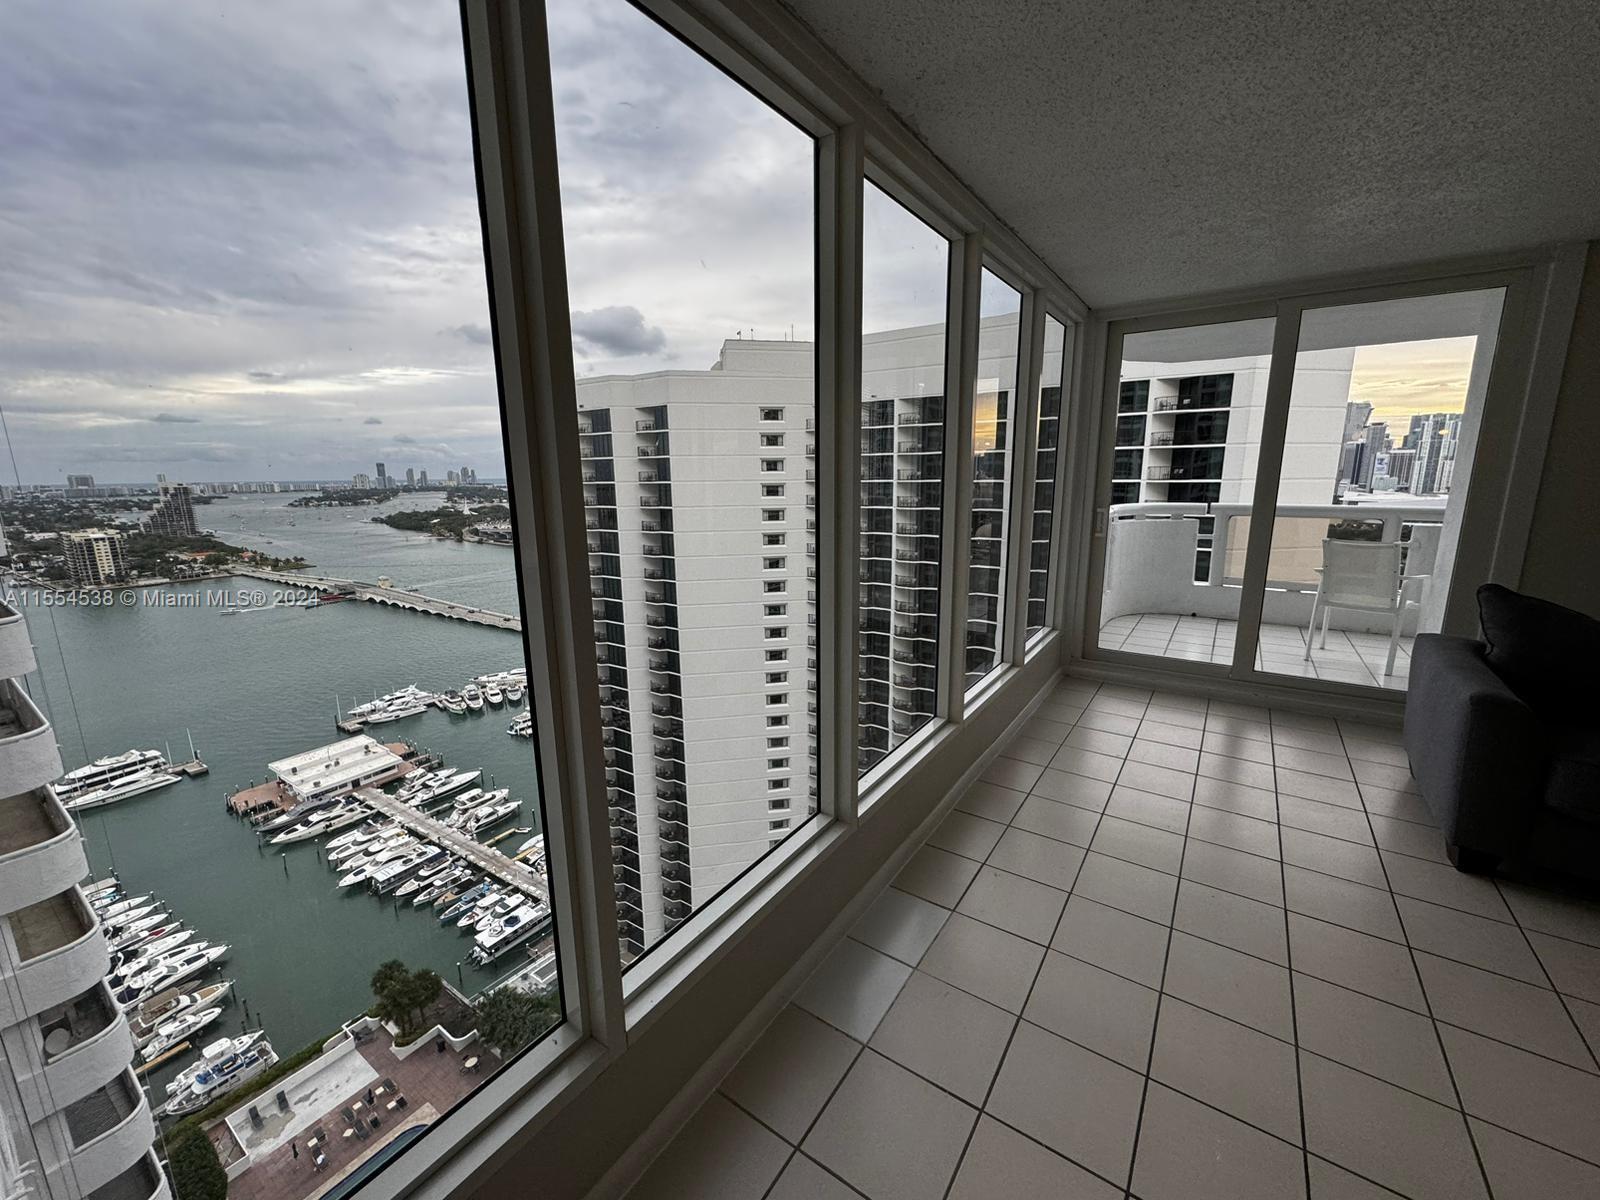 Amazing view For Rent 2 nice bedrooms, 2.5 bathroom fully furnished condo in the heart of Miami with panoramic views of Biscayne Bay and Miami skyline. Beautiful condo with a Washer/dryer inside the unit. The building offers a variety of amenities such as 24hr concierge and security, restaurants, salons, retail stores, a food market, a liquor store, pharmacy, pool, gym and more. Easy access to public transportation and just minutes from Brickell, Midtown, Design District, Wynwood, and Miami Beach. 1st month +1 last month + 1security deposit

ONLY 6 MONTHS - $ 4500 special rate.